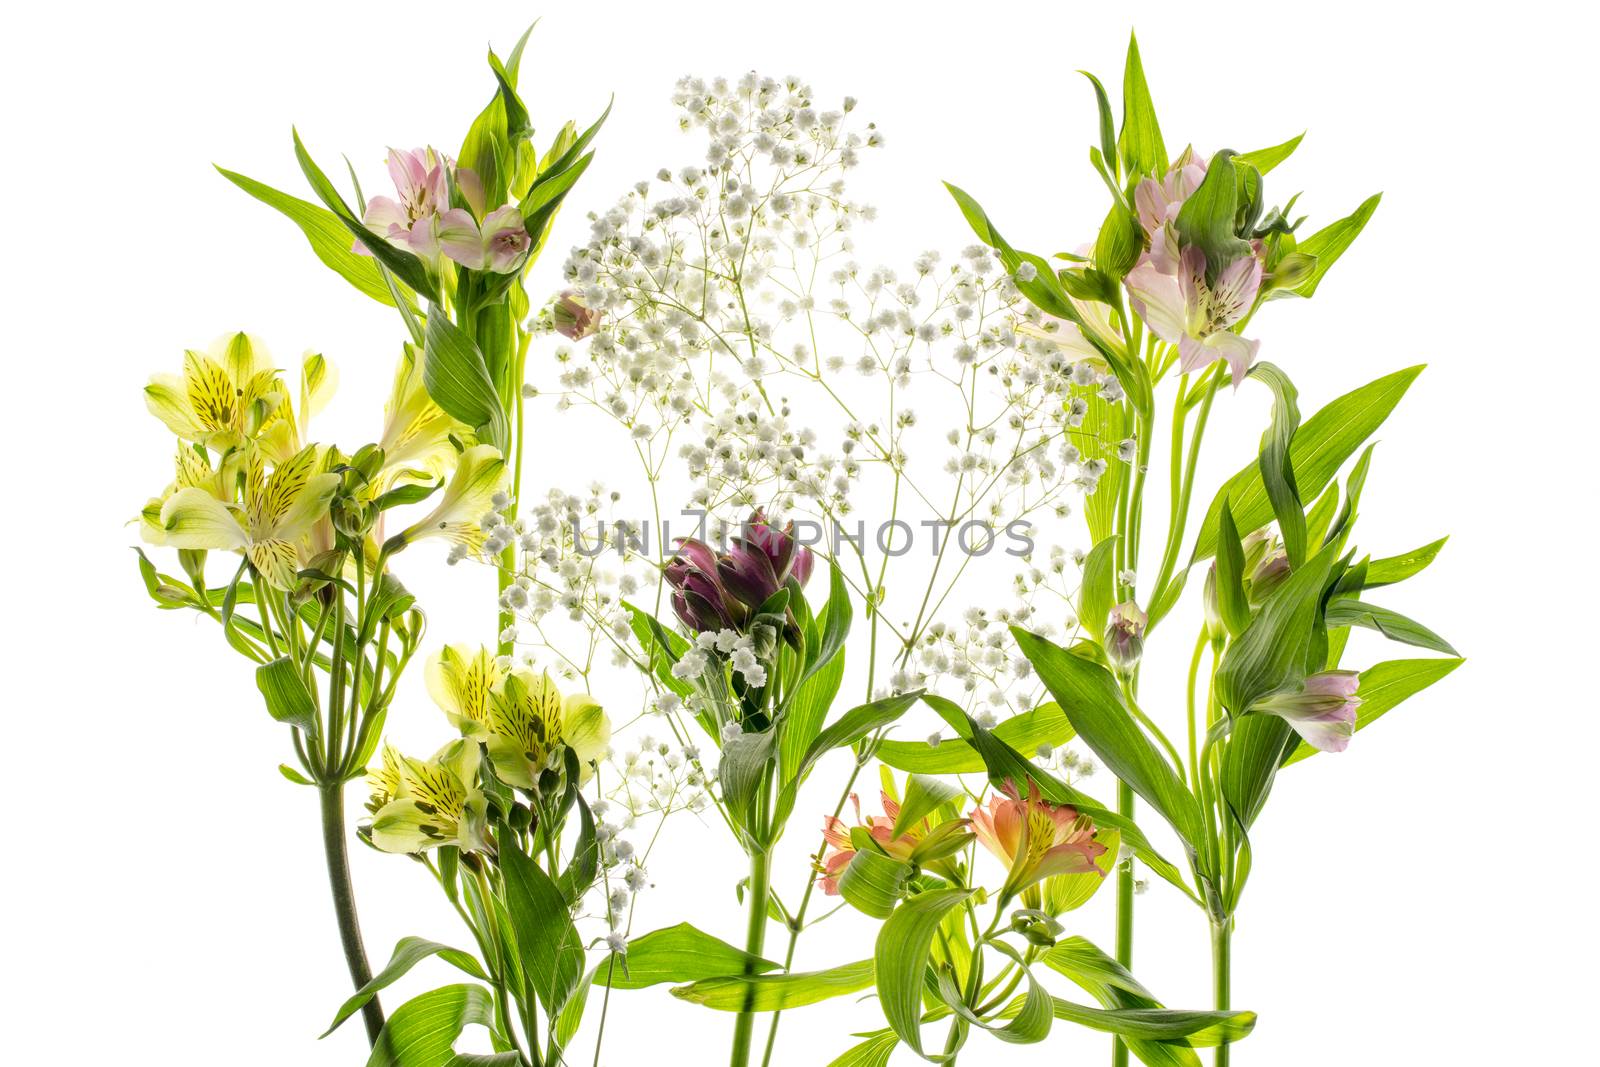 Alstroemeria flower with stamens, close-up on a white background